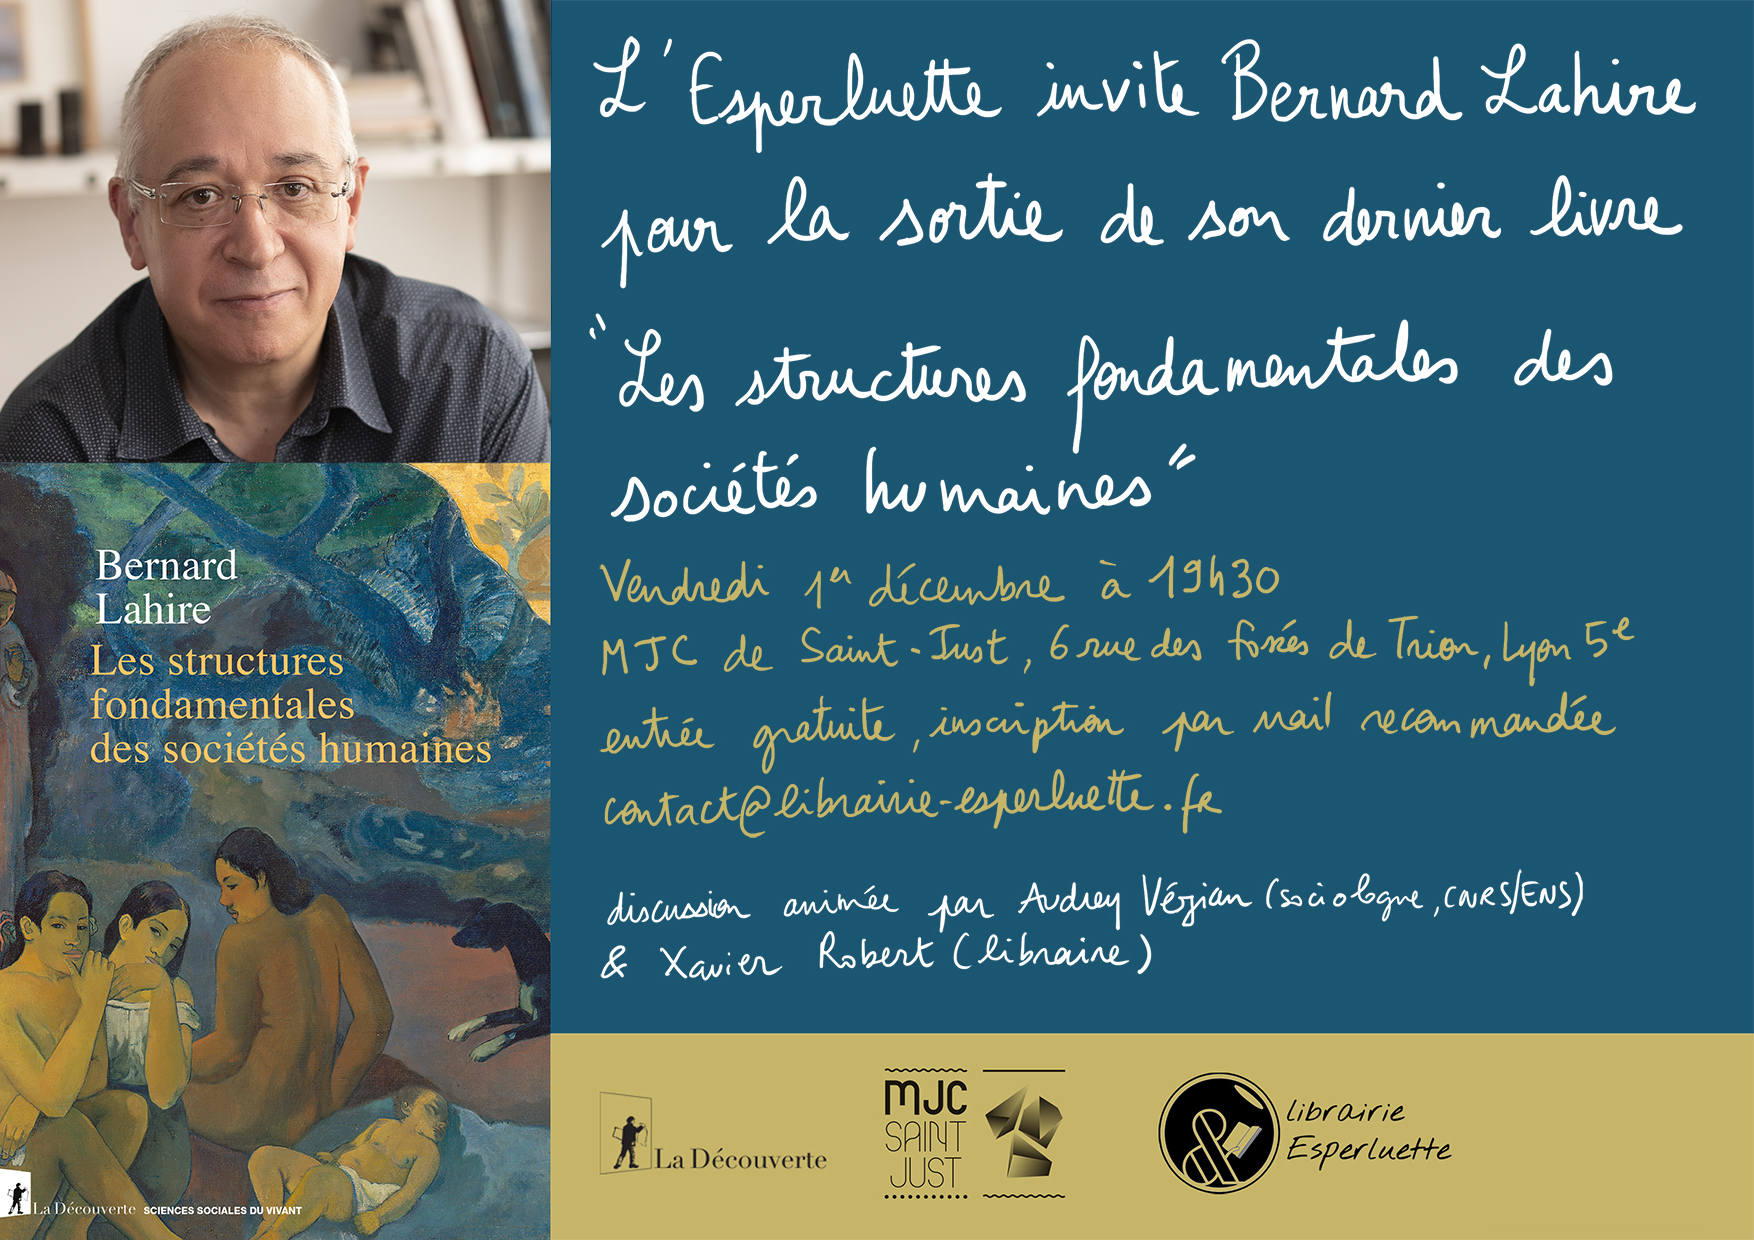 You are currently viewing Rencontre avec Bernard Lahire